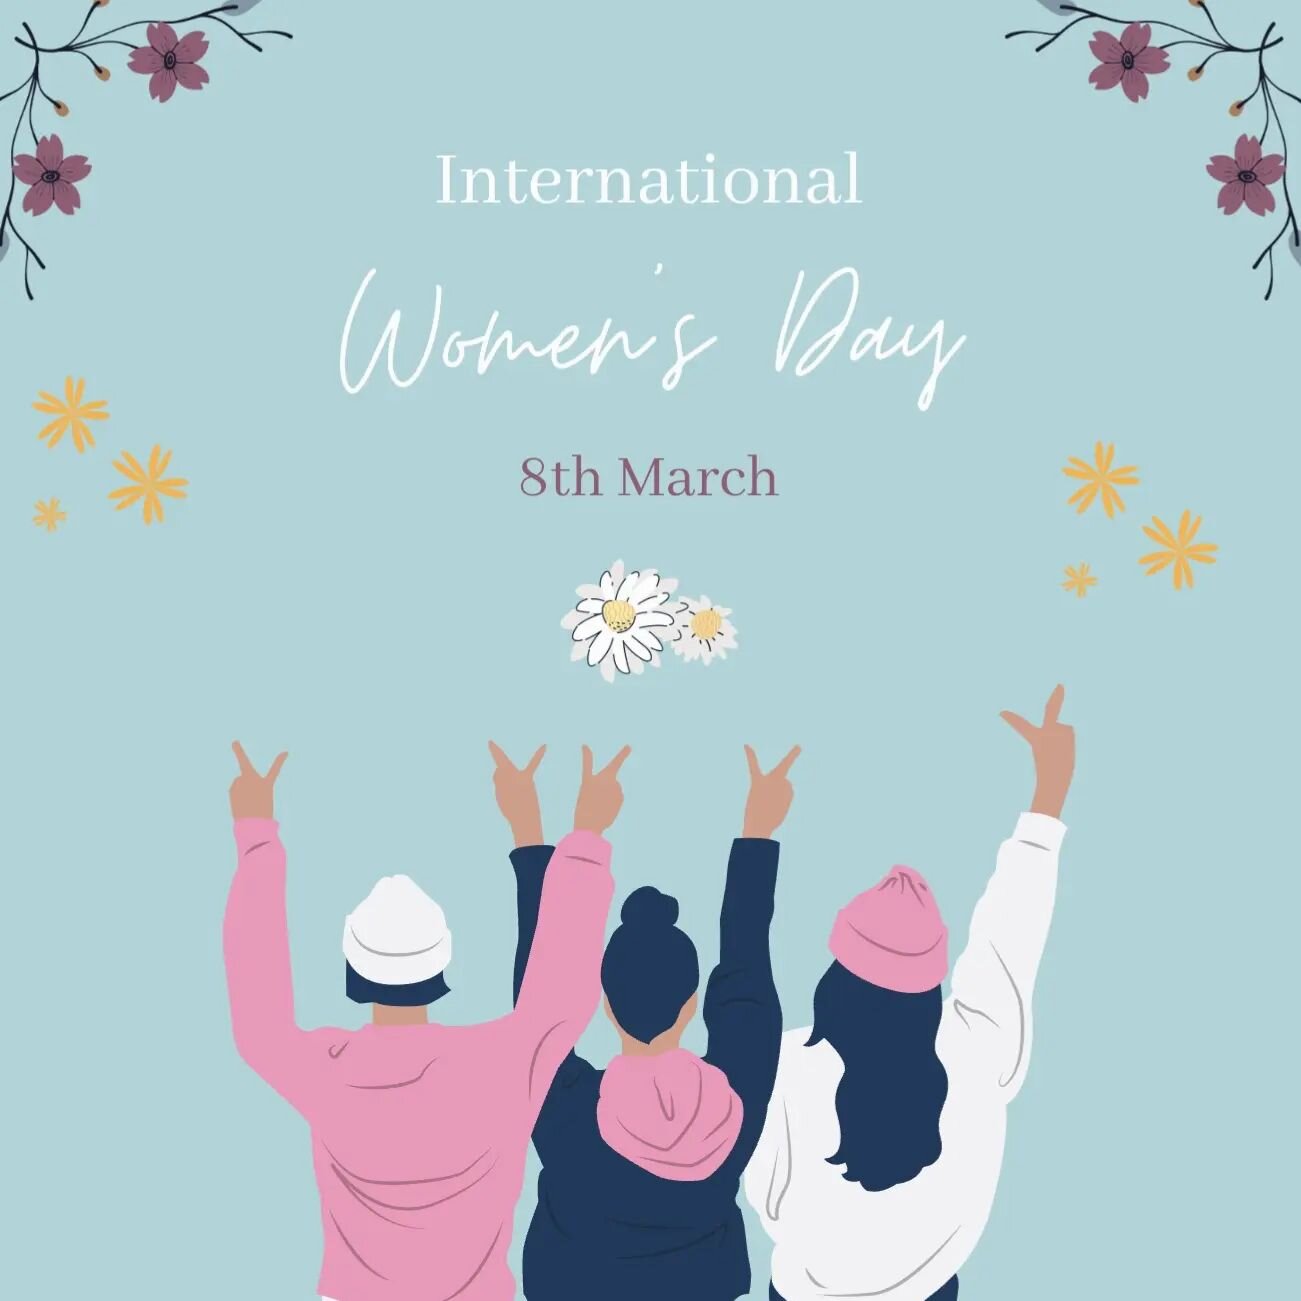 Happy #internationalwomensday to all women across the world 🌎 and mostly to my clients.

You are all amazing, strong, beautiful women and I am grateful to be on this journey with you 💐✨✨✨